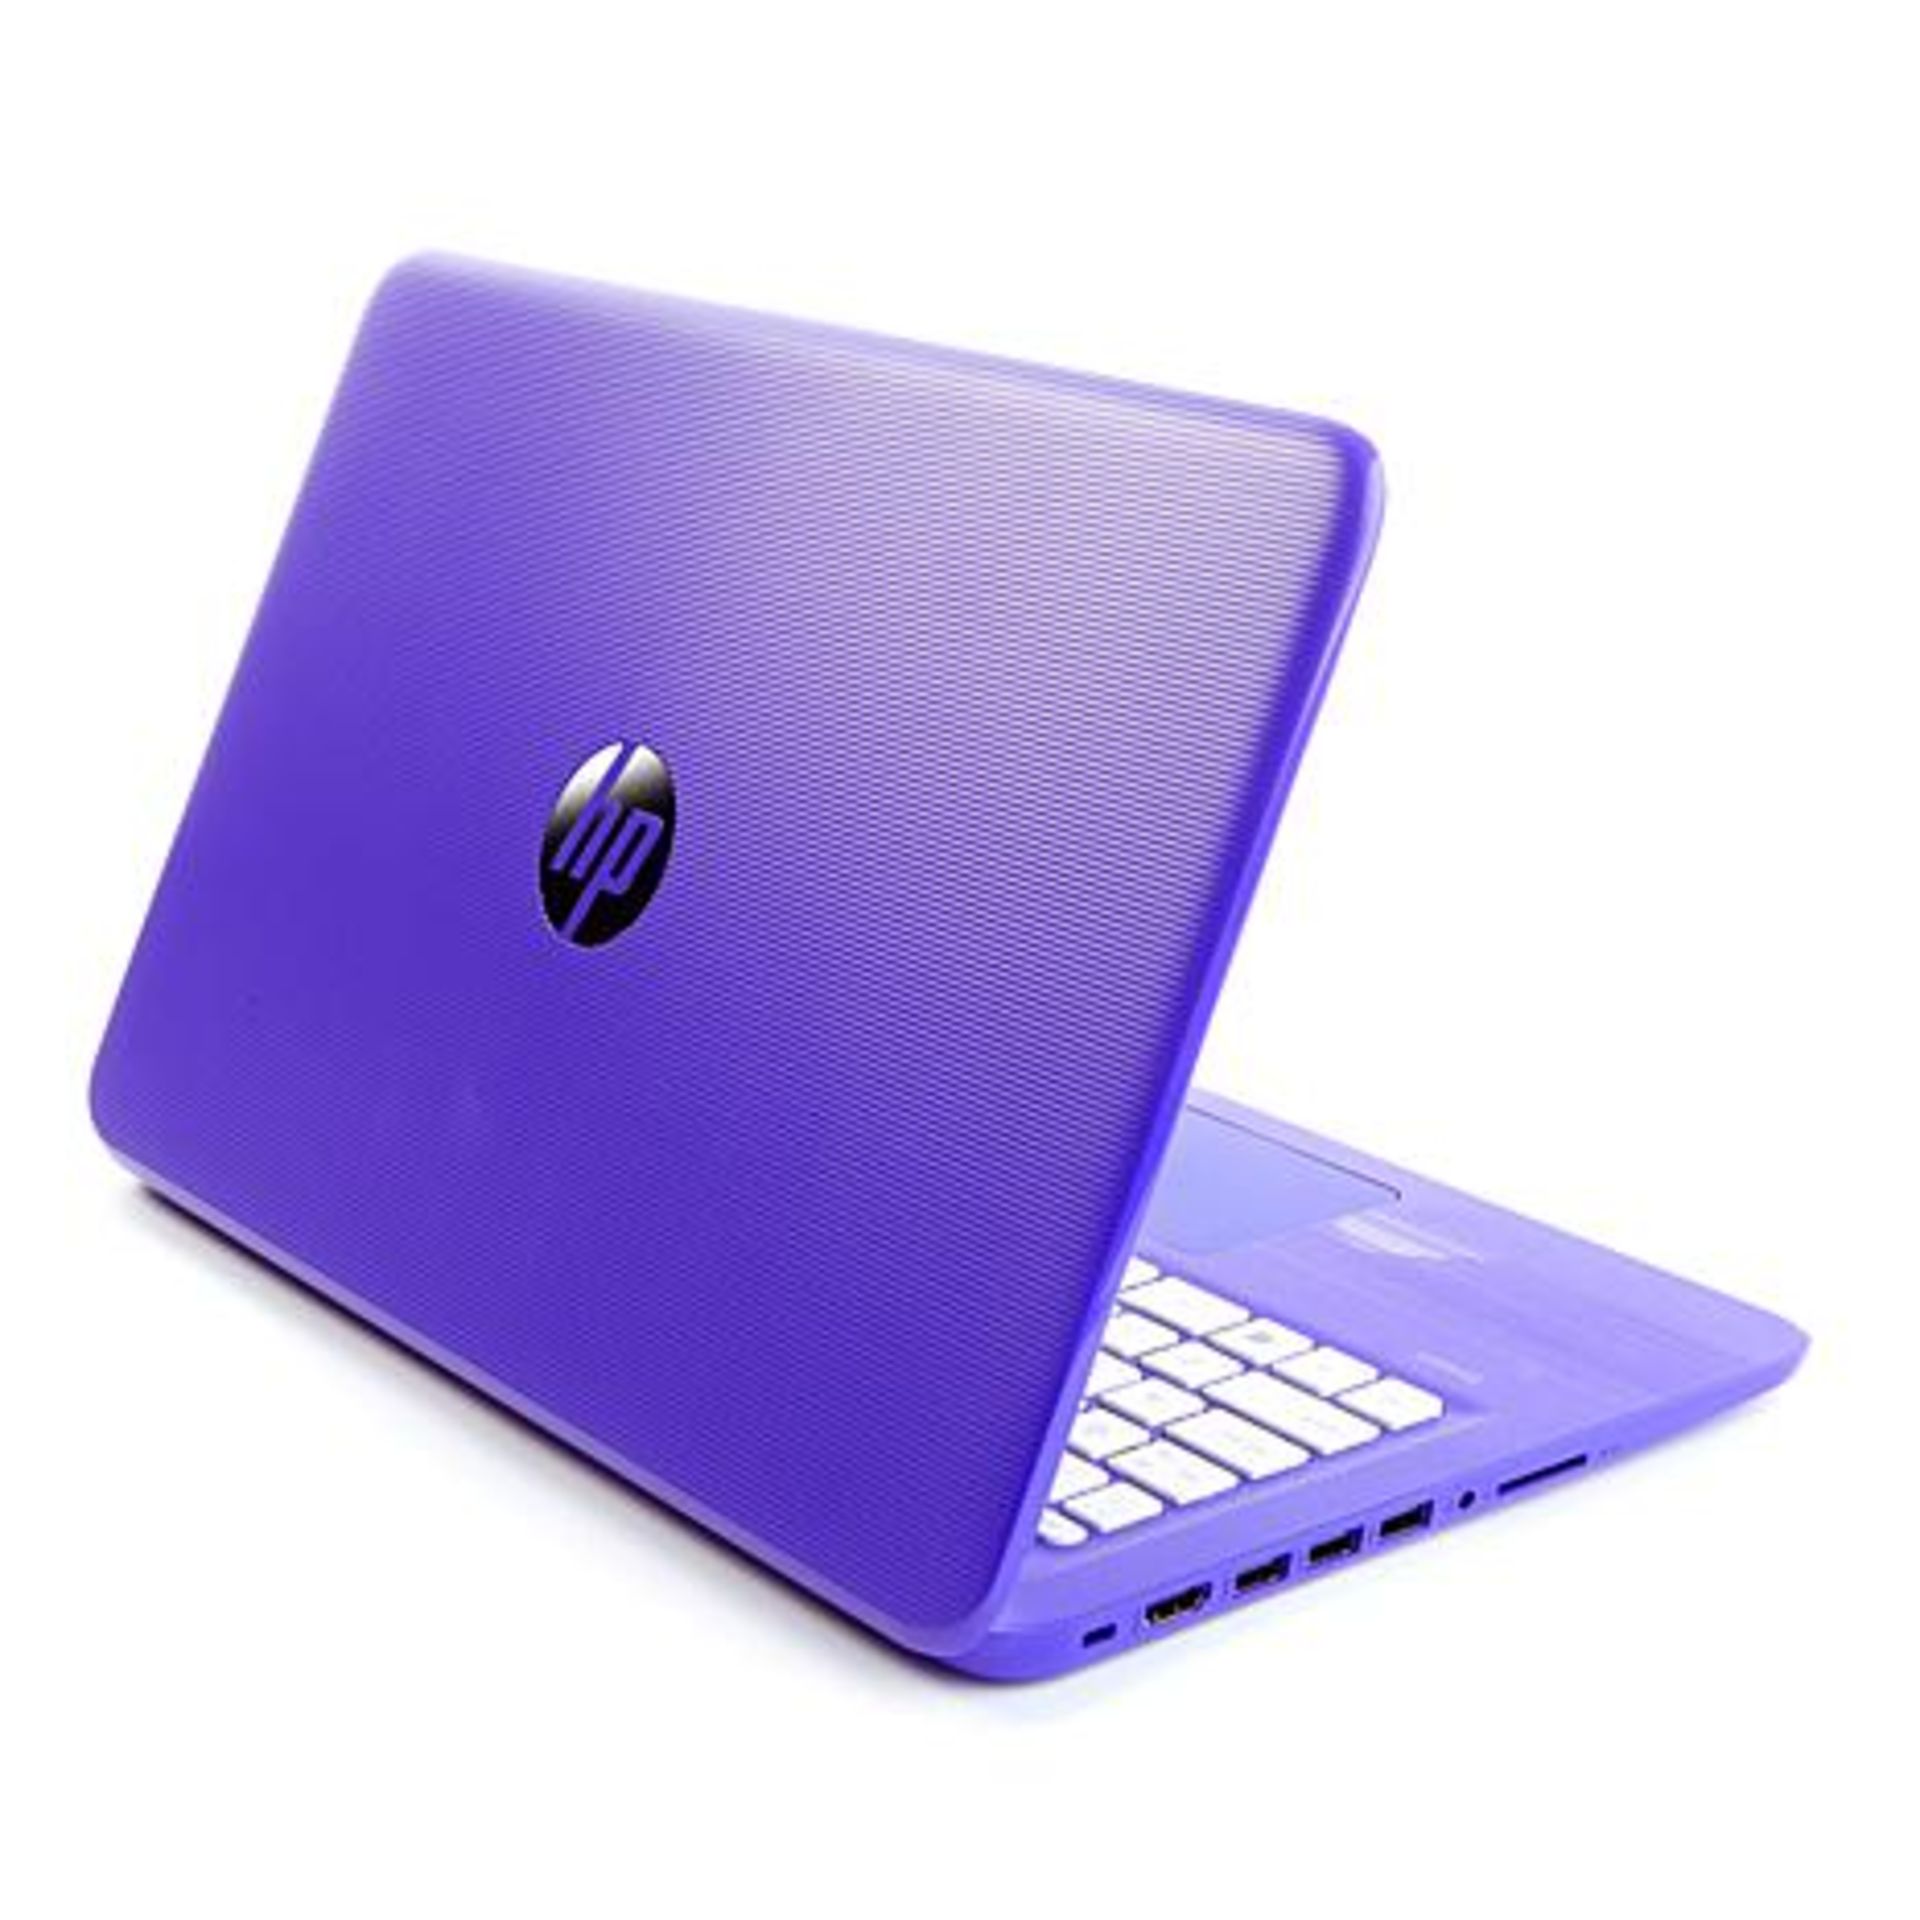 V Grade A HP Violet Purple Stream Ultra Thin 14-ax002na With Windows 10 Home - 1.6Ghz Intel - Image 3 of 3